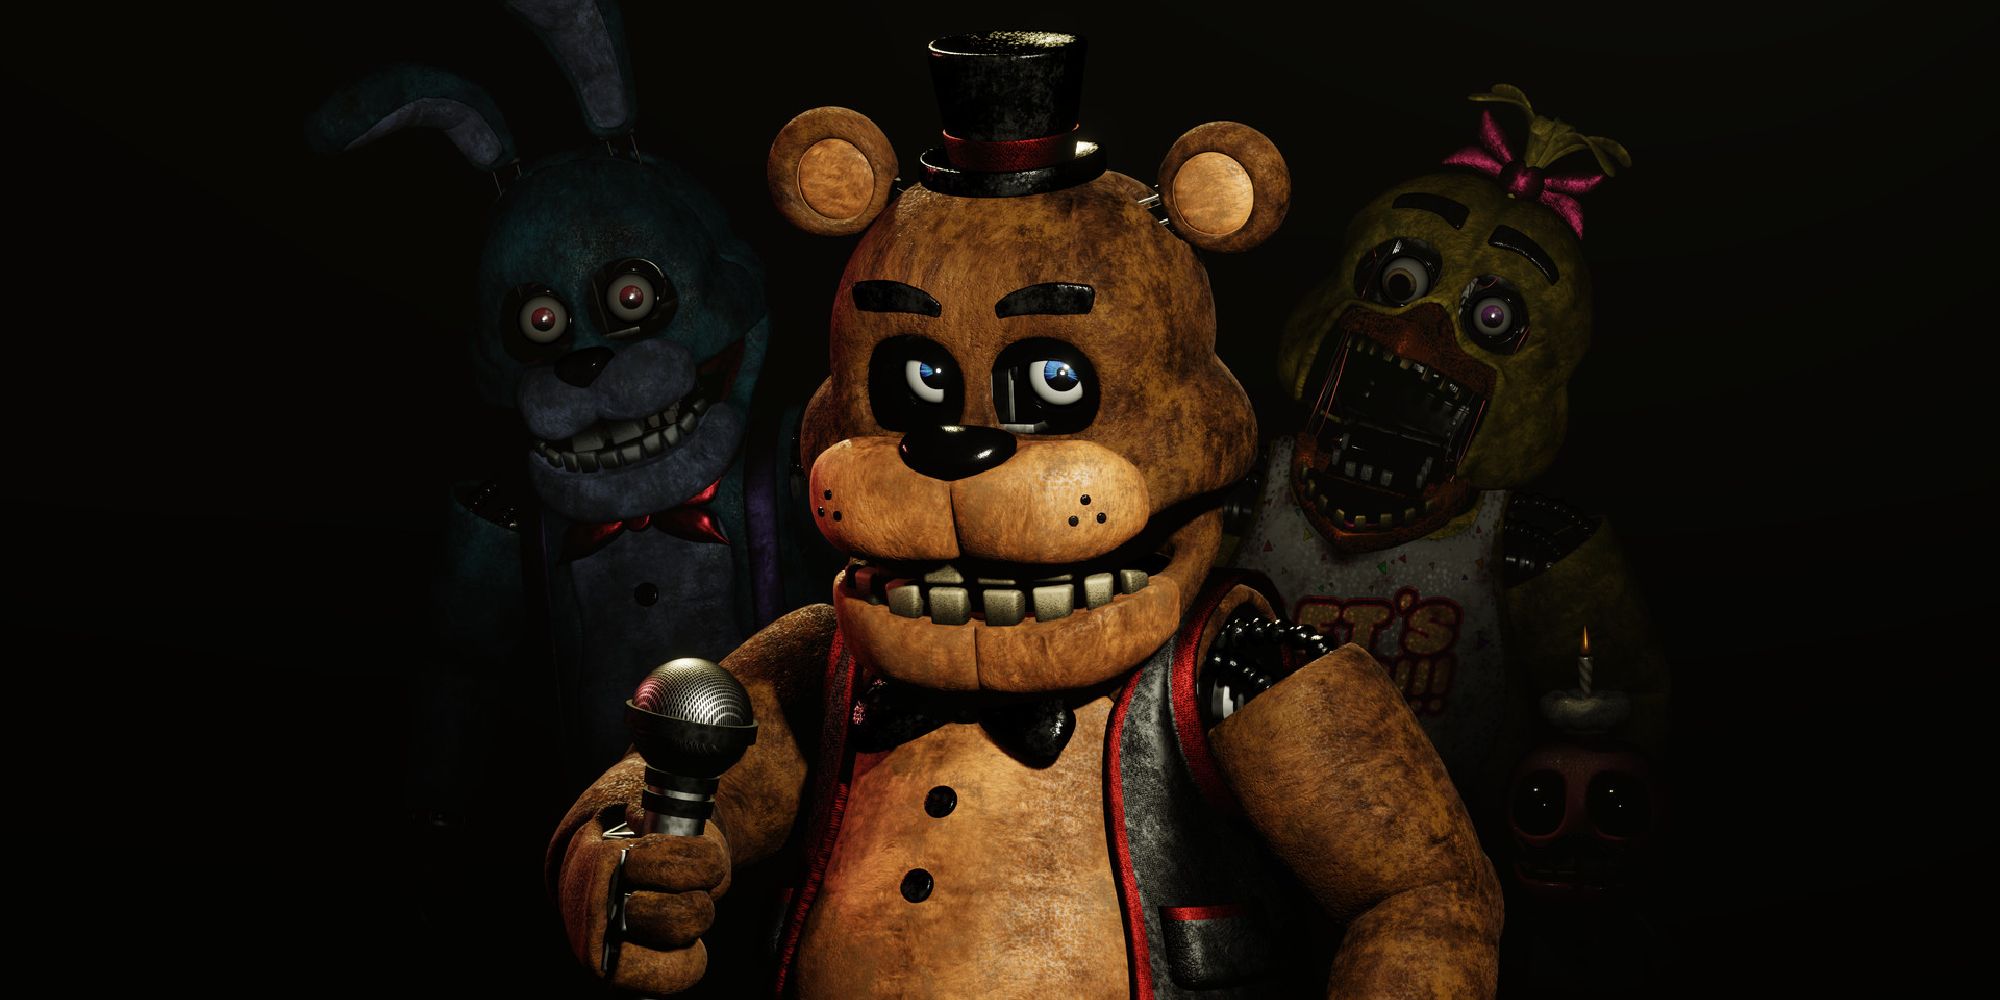 Freddy stabds looking at the viewer with a microphone in one hand. Chica and Bonnie are barely visible in the darkness behind him